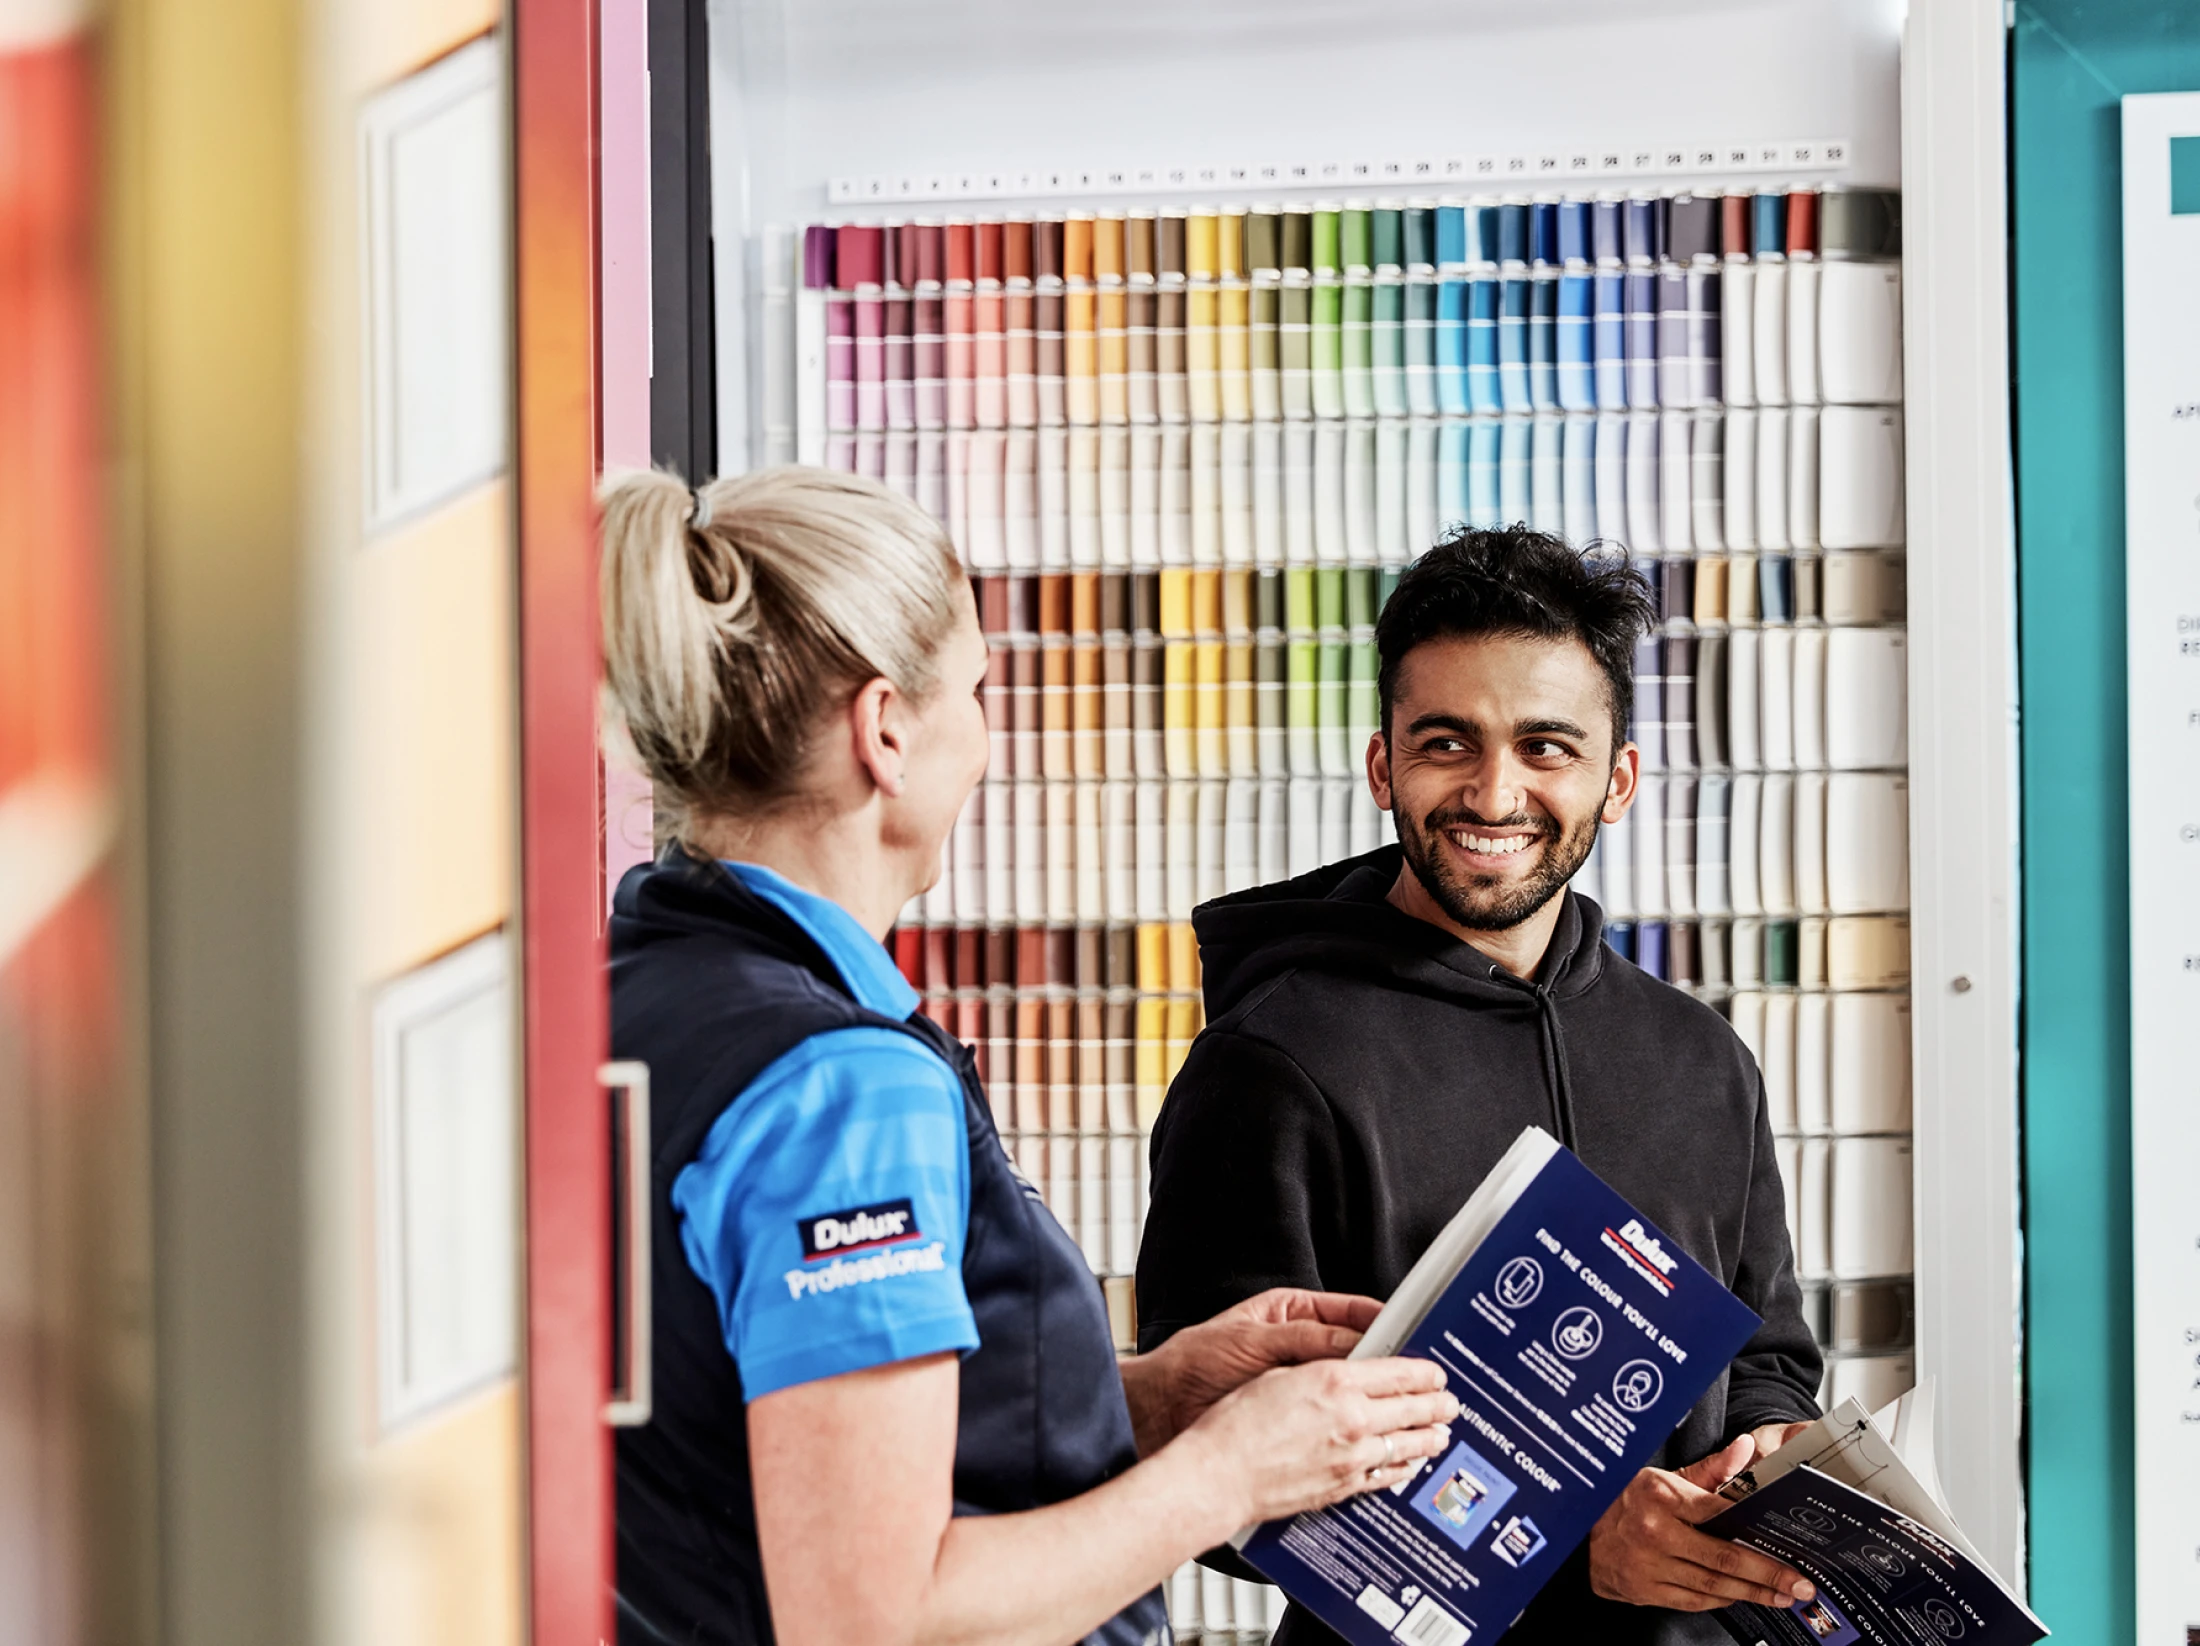 Dulux employee giving advice to a customer in store. 